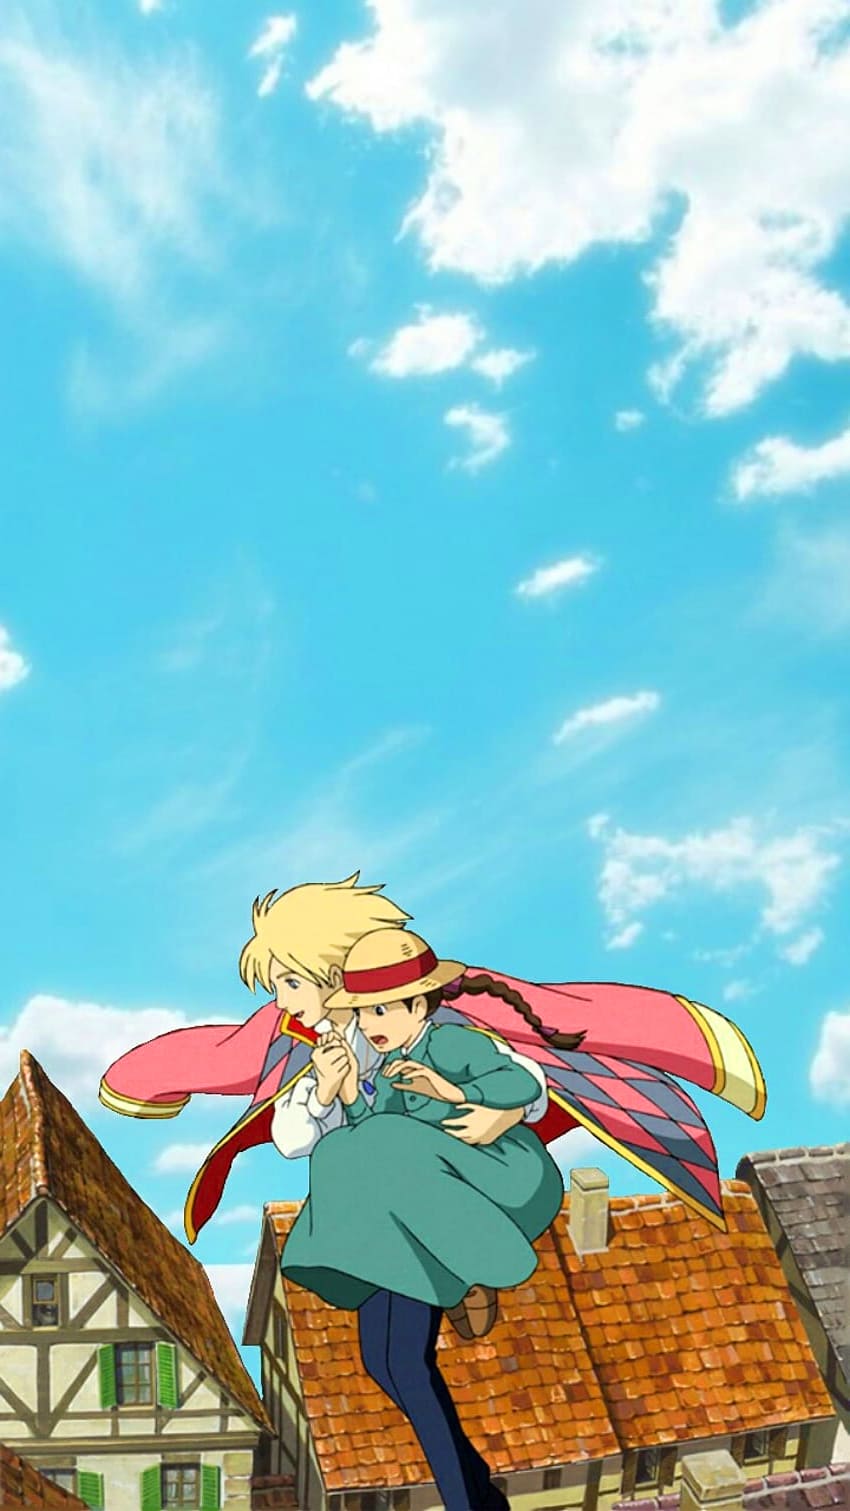 Wallpaper ID 303173  Anime Howls Moving Castle Phone Wallpaper Howl  Jenkins Pendragon Sophie Hatter 1440x3200 free download